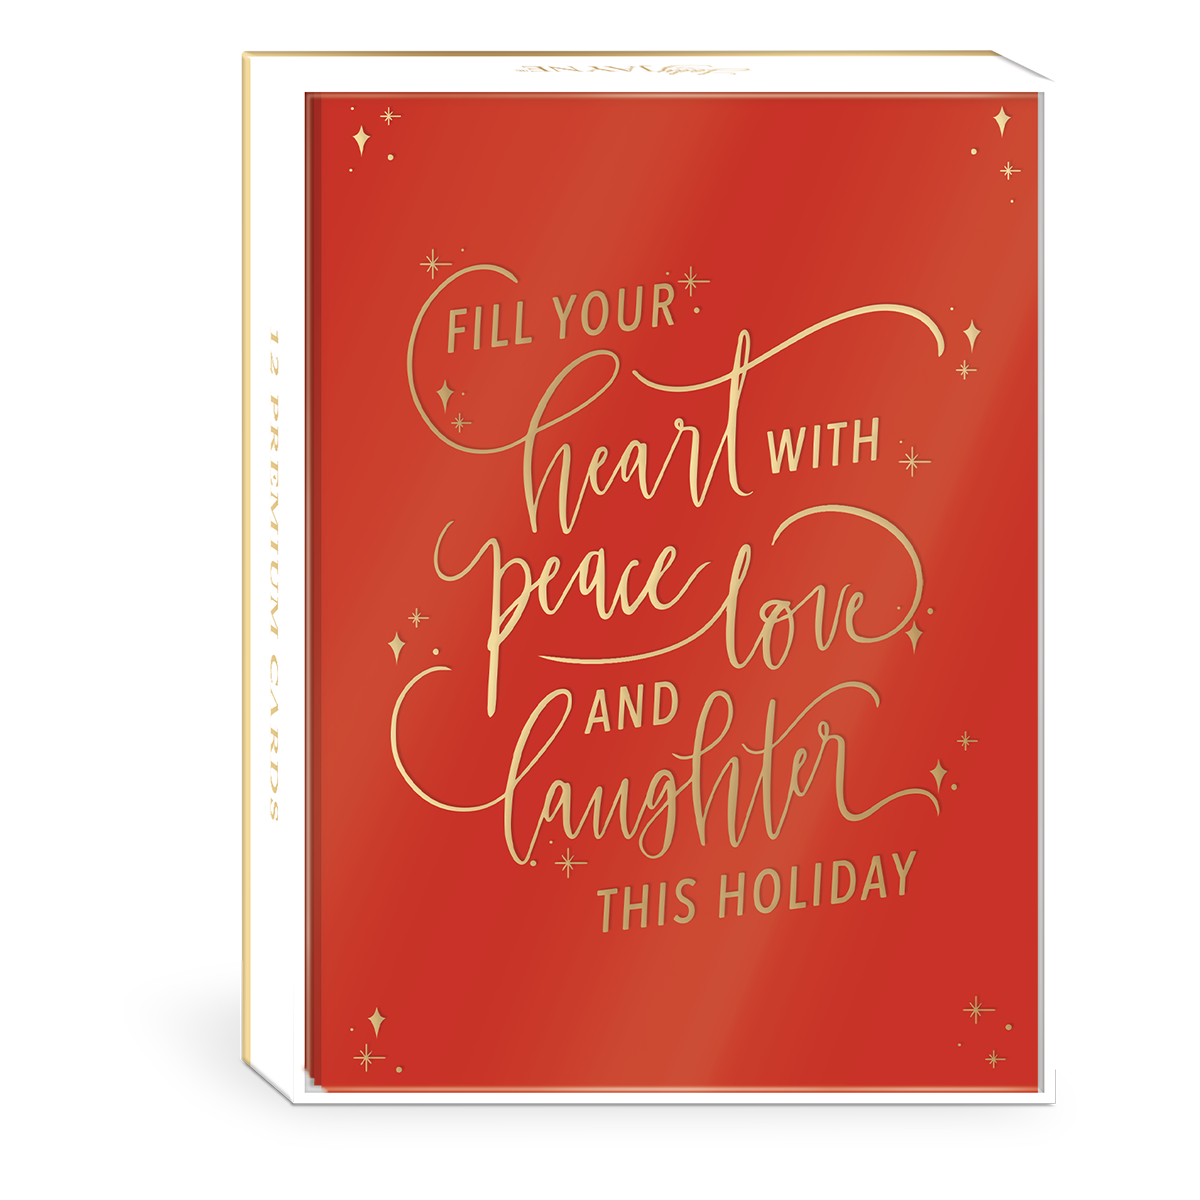 Greetings Red Boxed Holiday Cards Product